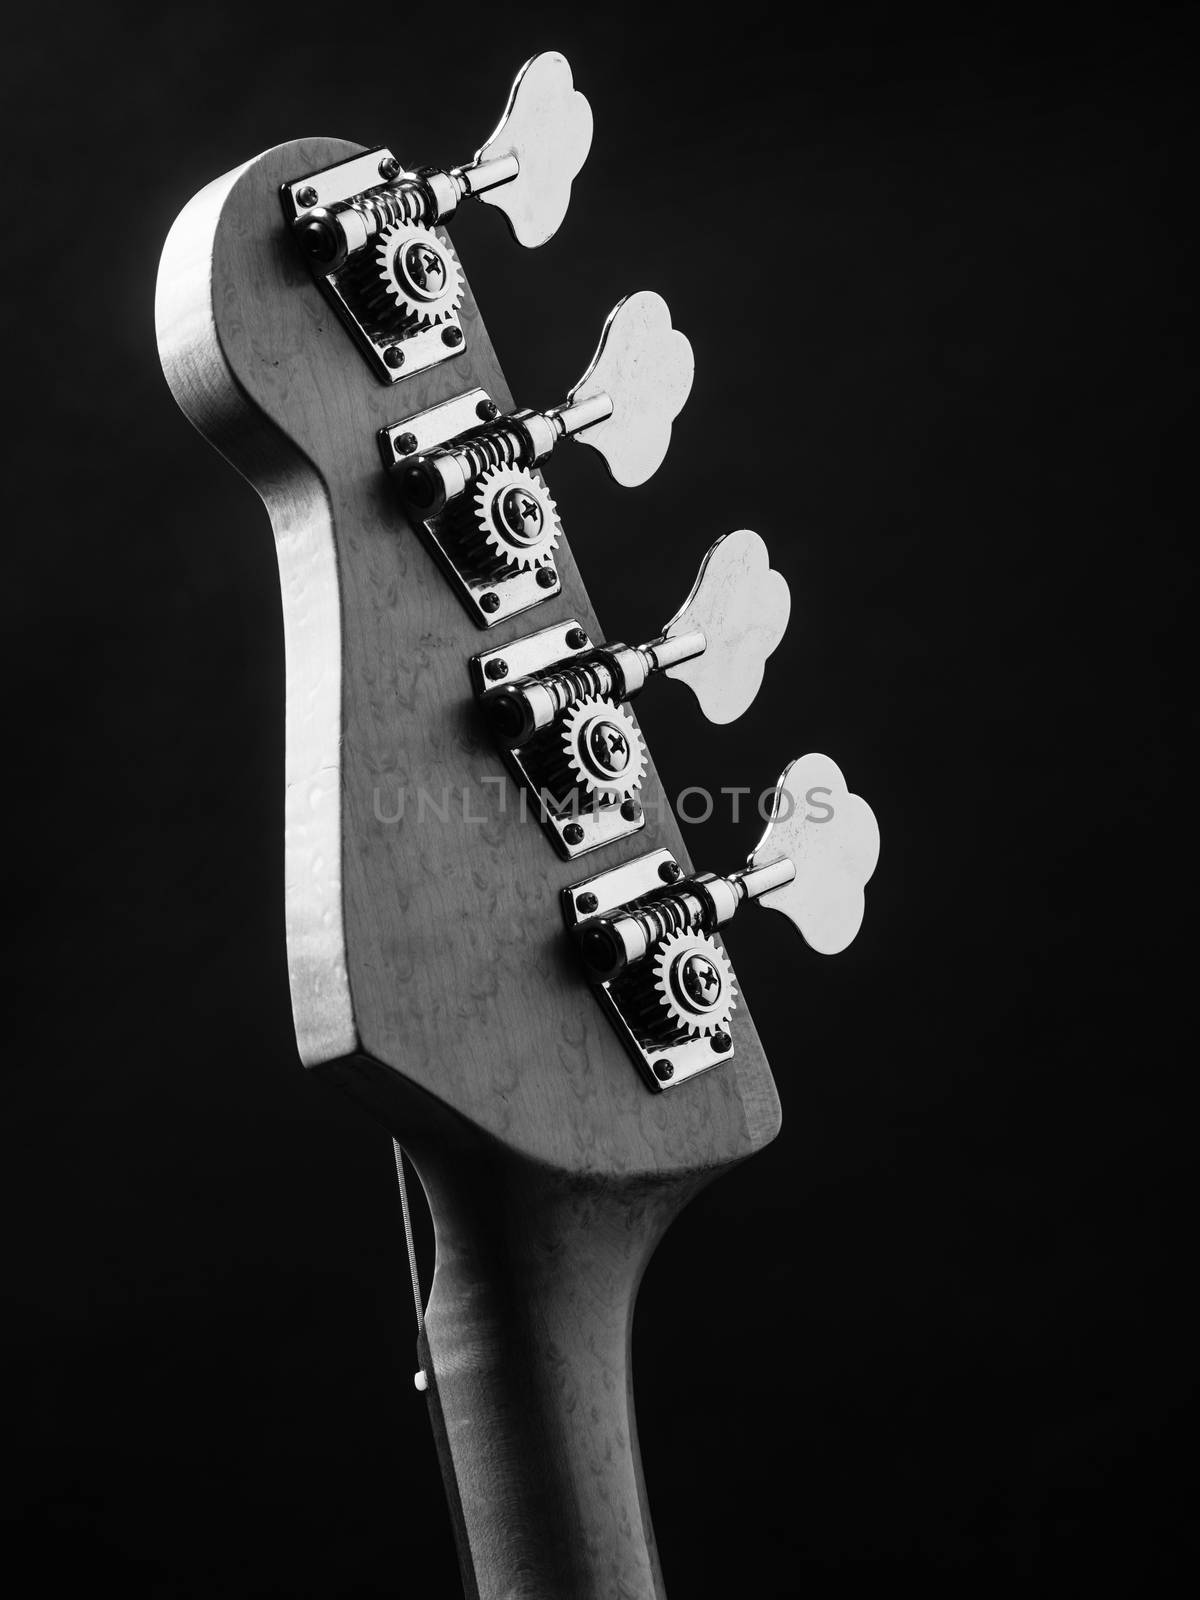 Bass guitar headstock by sumners